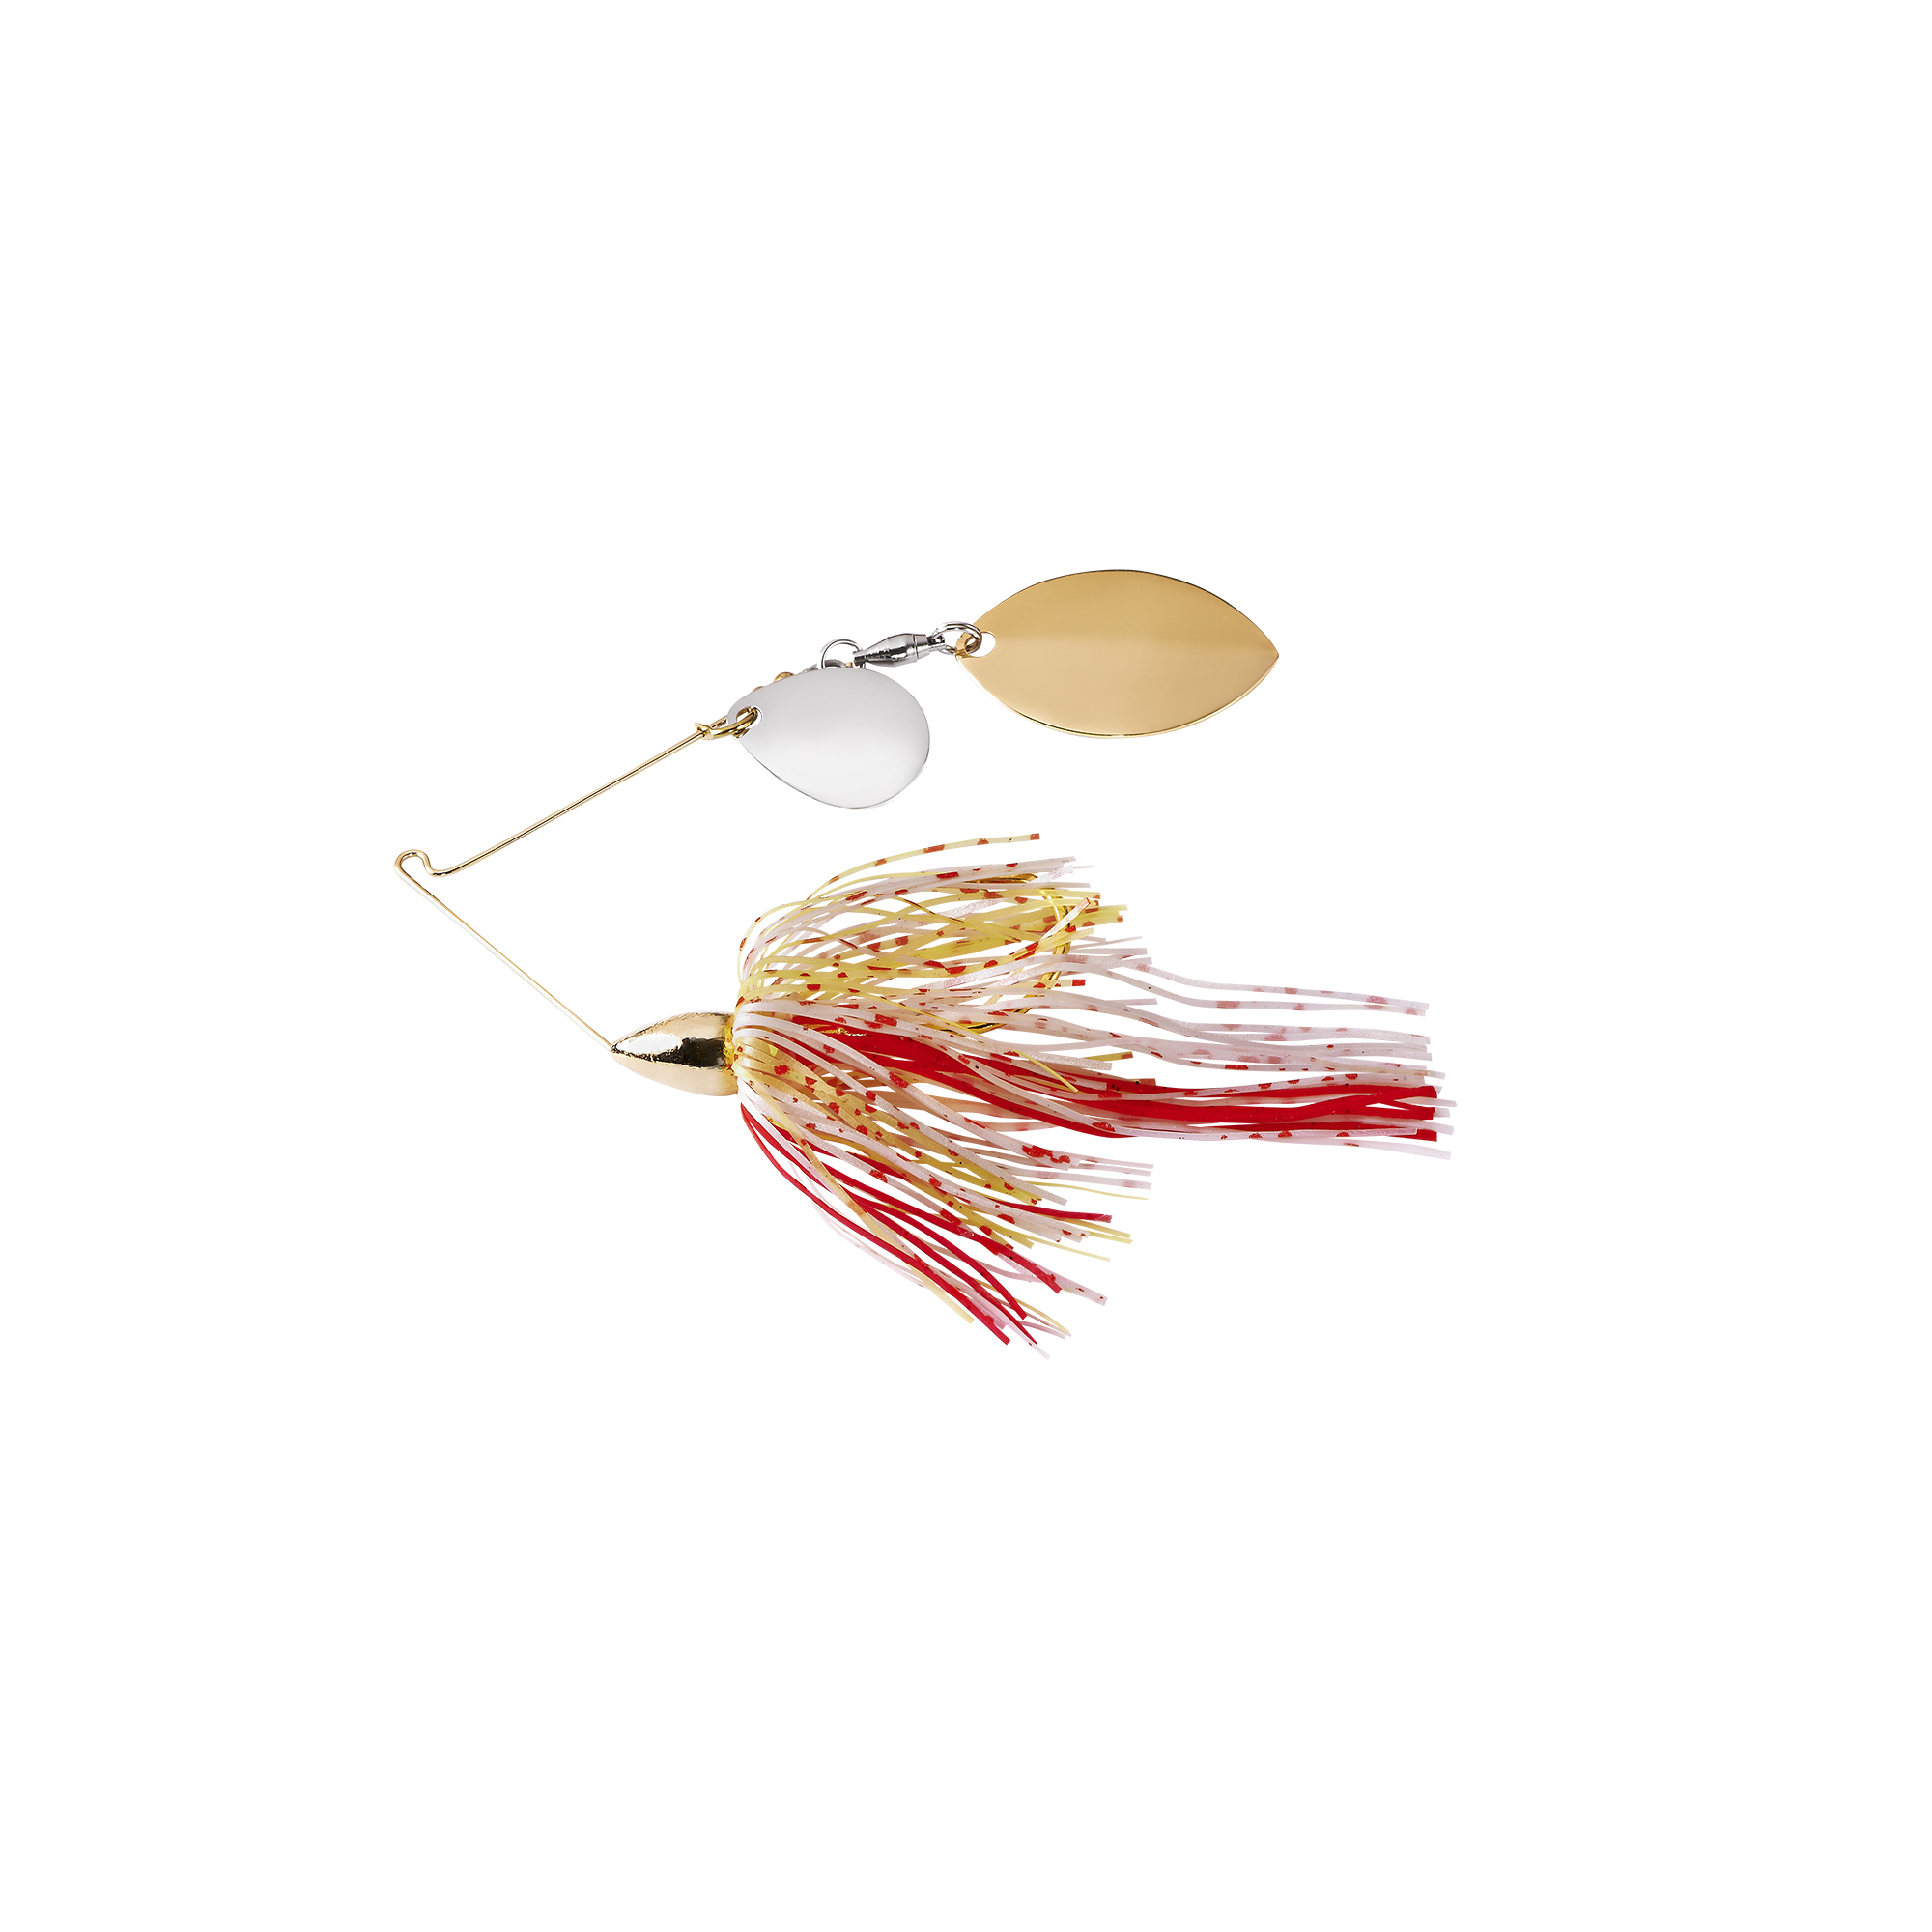 War Eagle WE516G34 Finesse Sun Perch 5/16oz Fishing Spinnerbait Freshwater Lure 